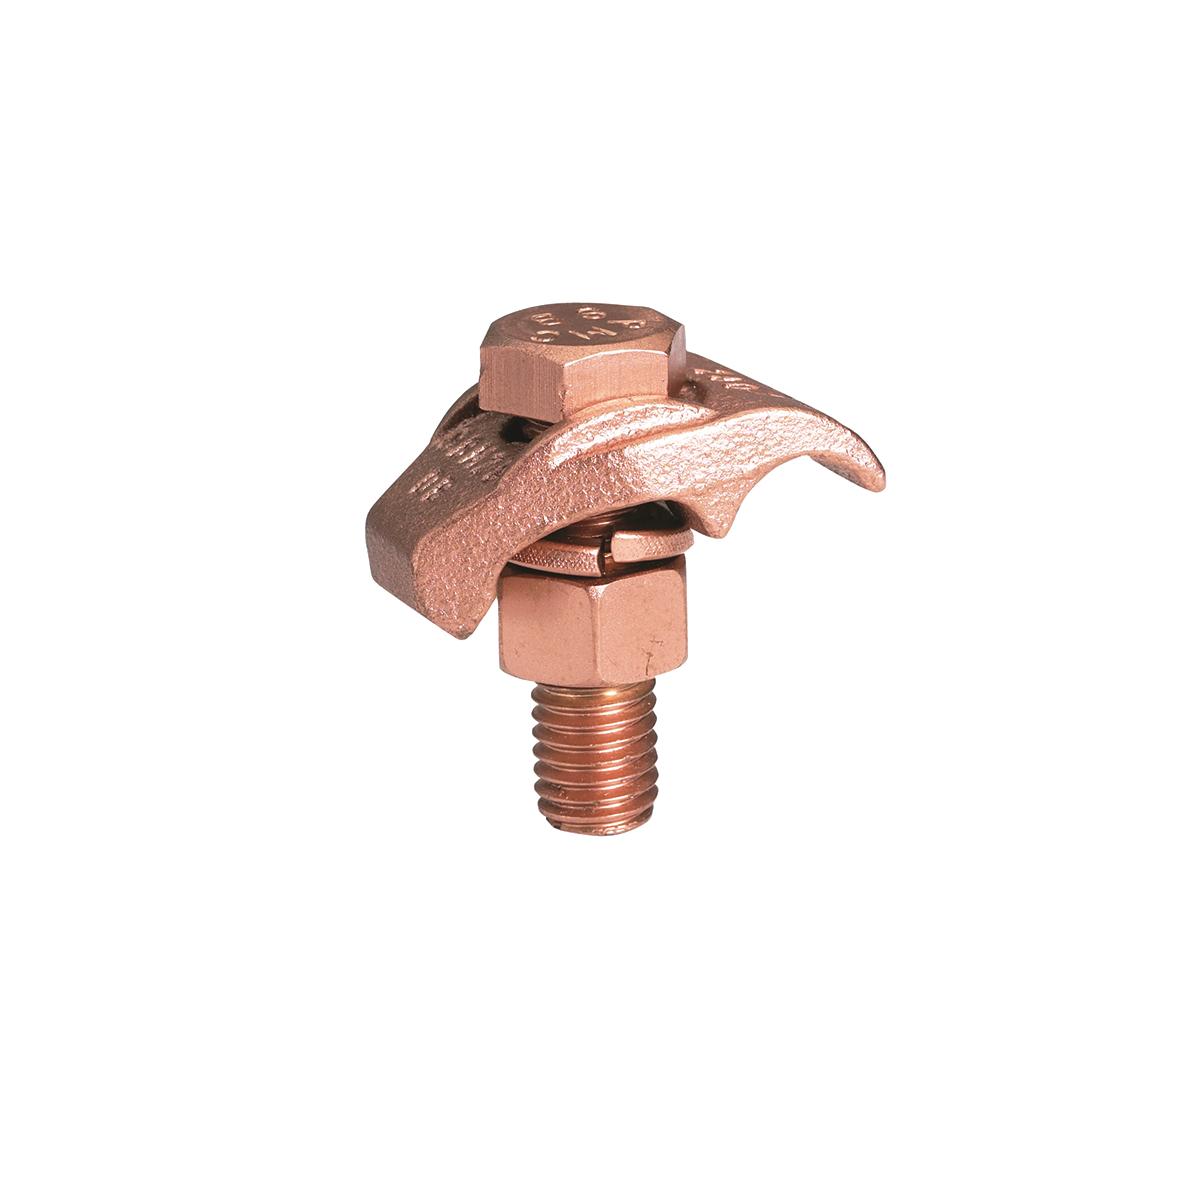 Hubbell GBM26OSB Mechanical Grounding Connector accommodates Bar up to 1/4" thick; 4 SOL - 2/0 STR Copper conductor. 